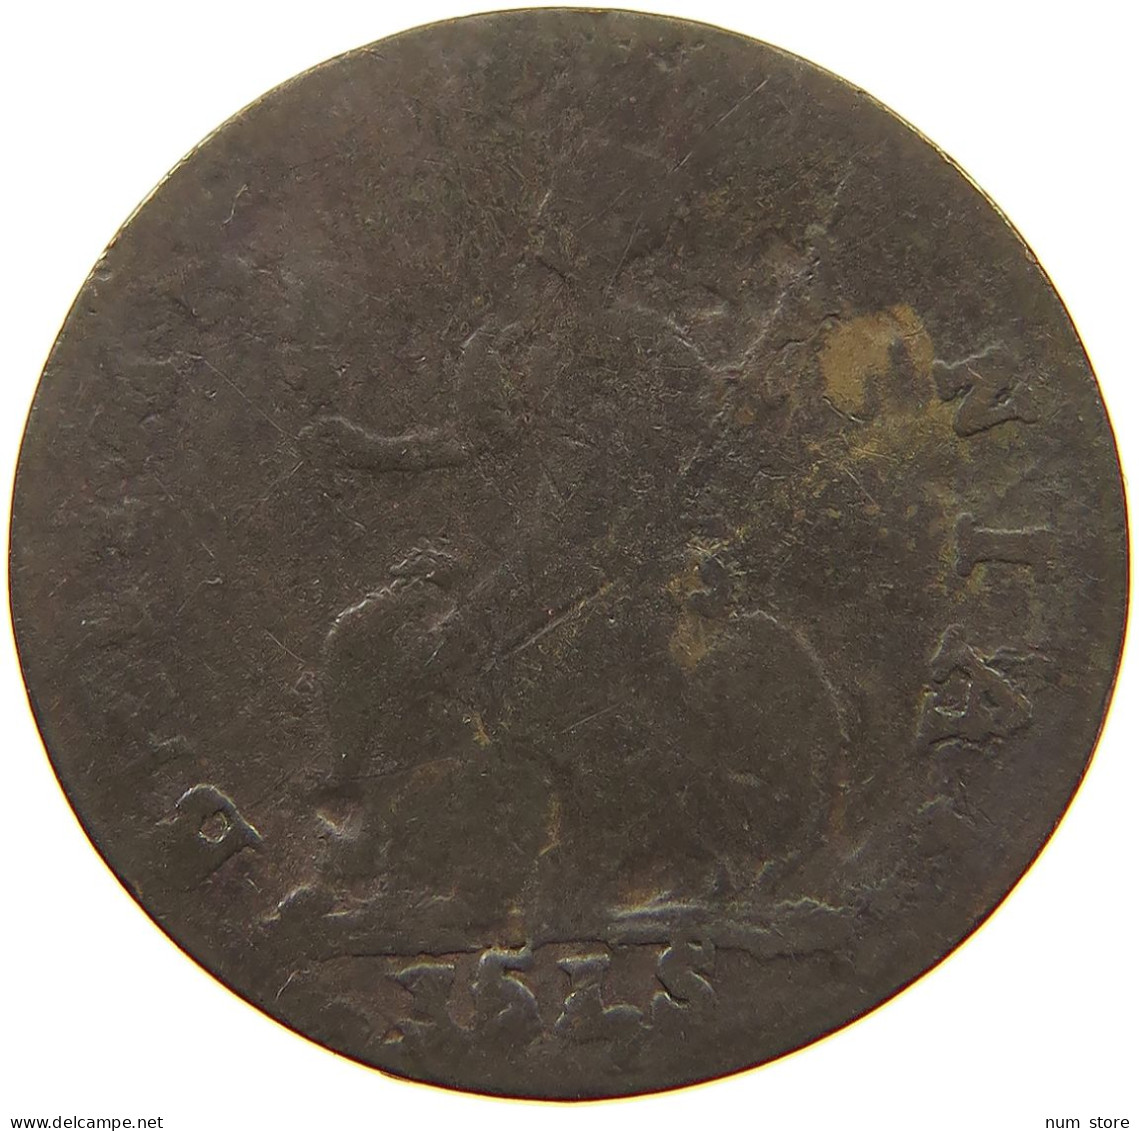 GREAT BRITAIN FARTHING  GEORGE III. 1760-1820 EVASION GEORGE RULES #a016 0175 - A. 1 Farthing